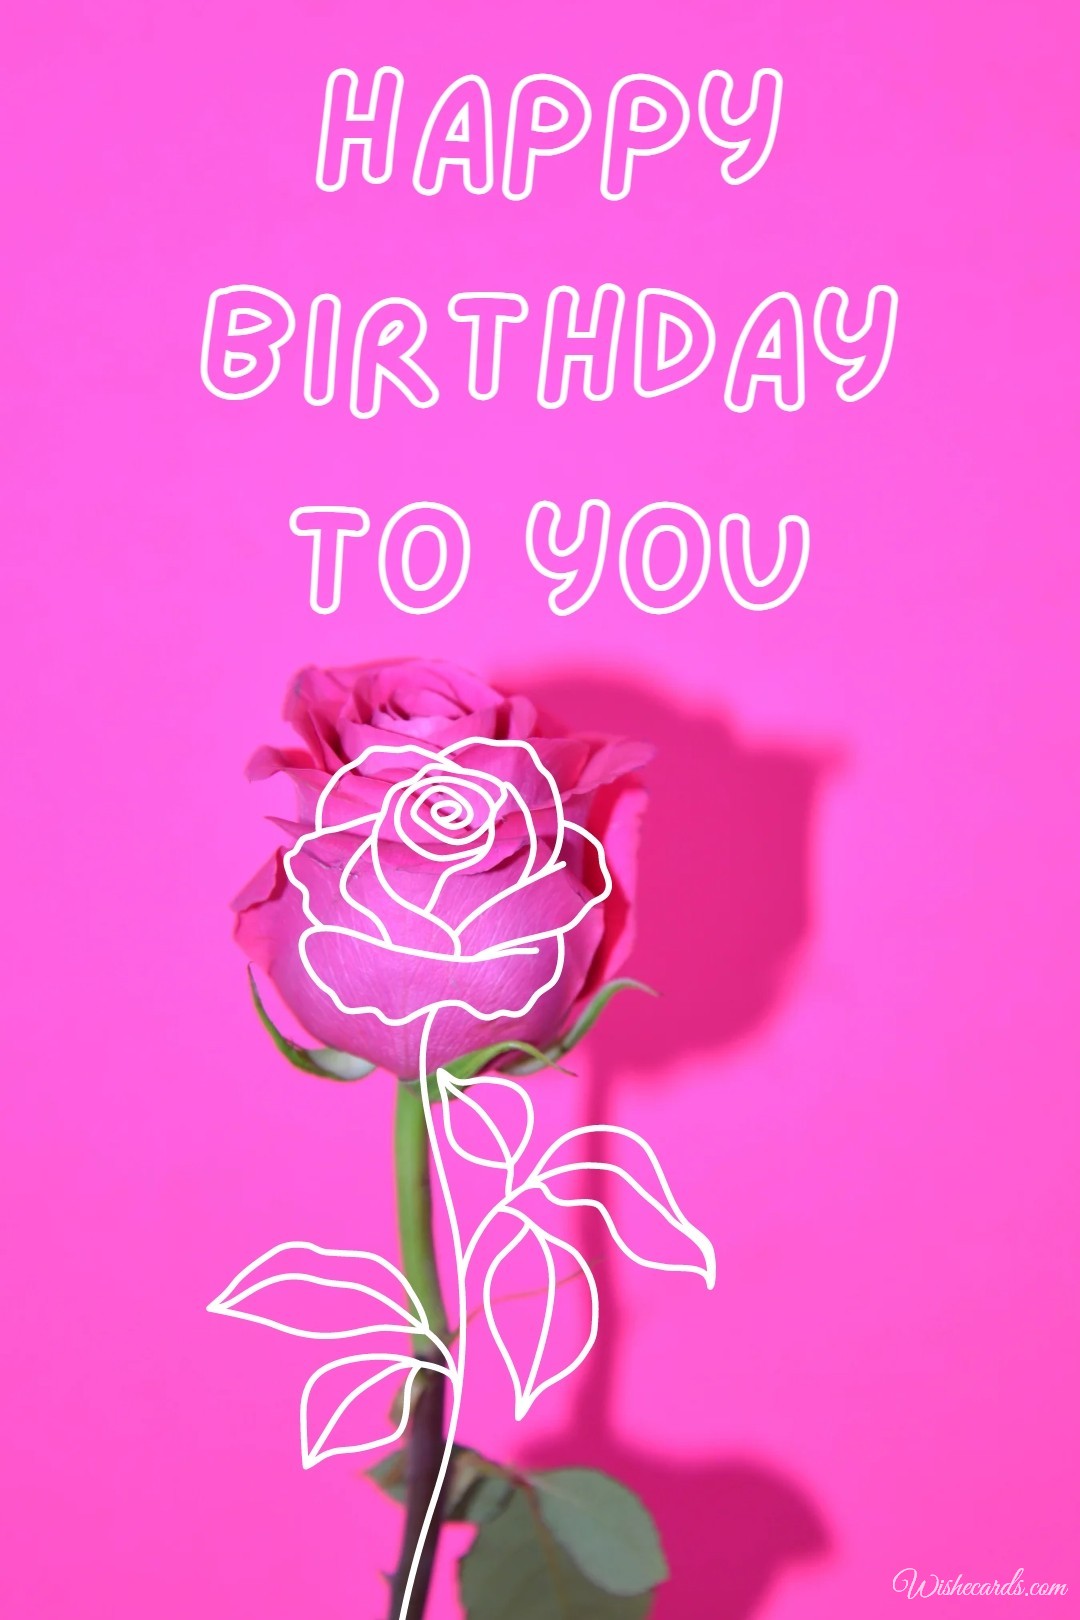 Free Happy Birthday Card For Woman With Roses